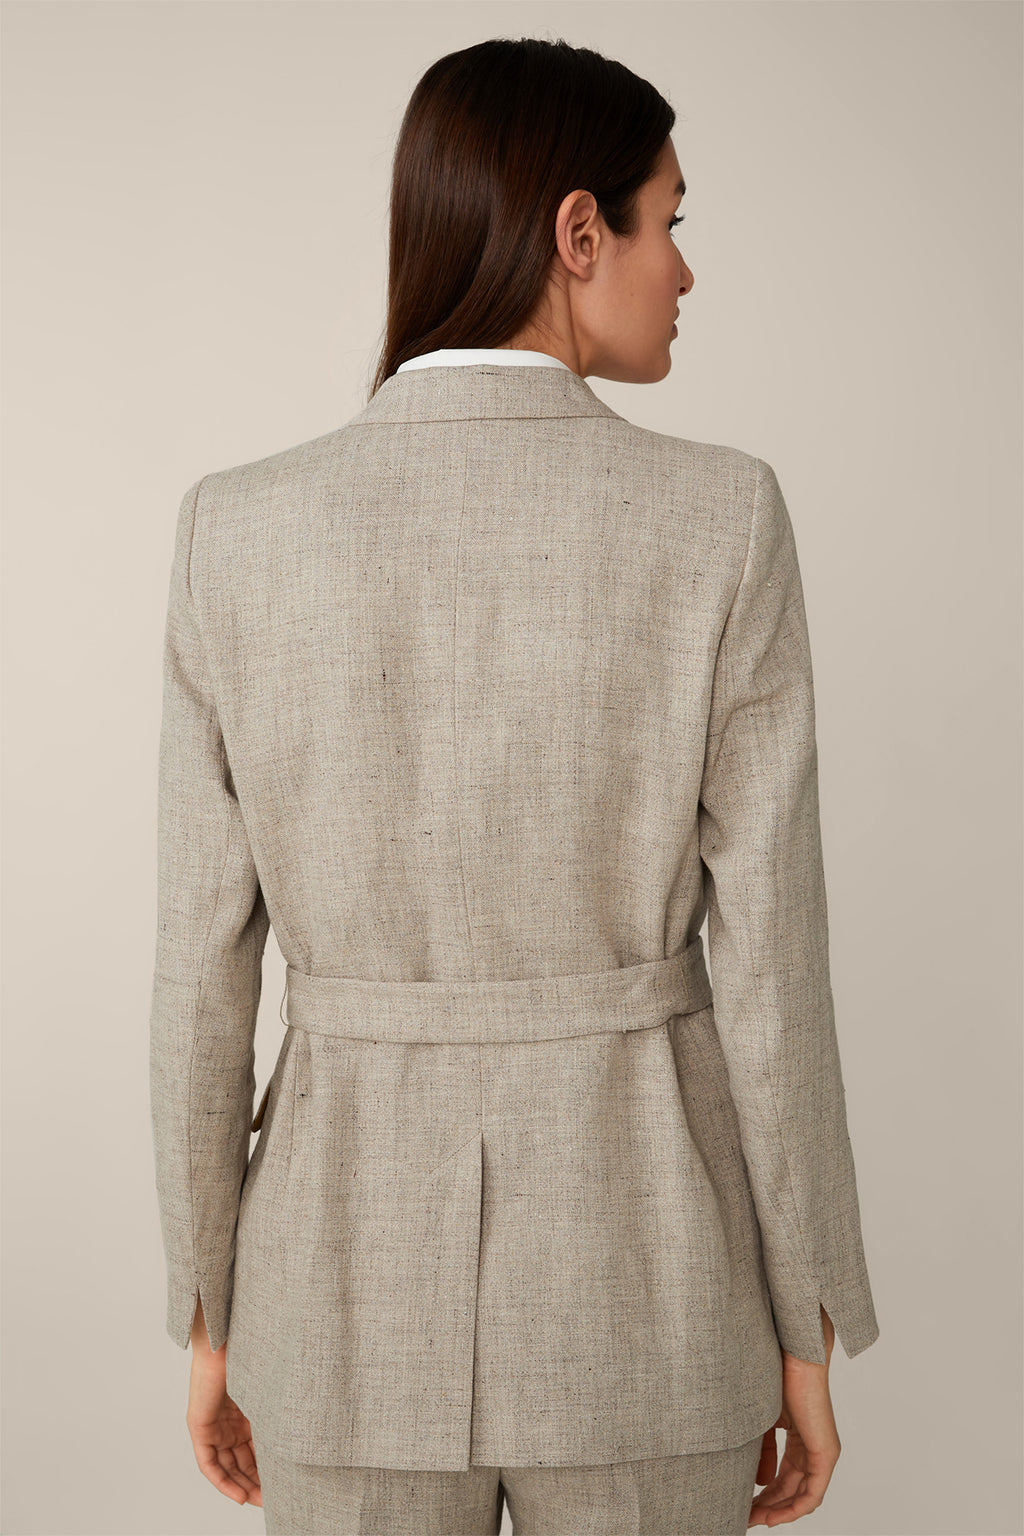 Double Breasted Blazer with Belt in Beige Patterned